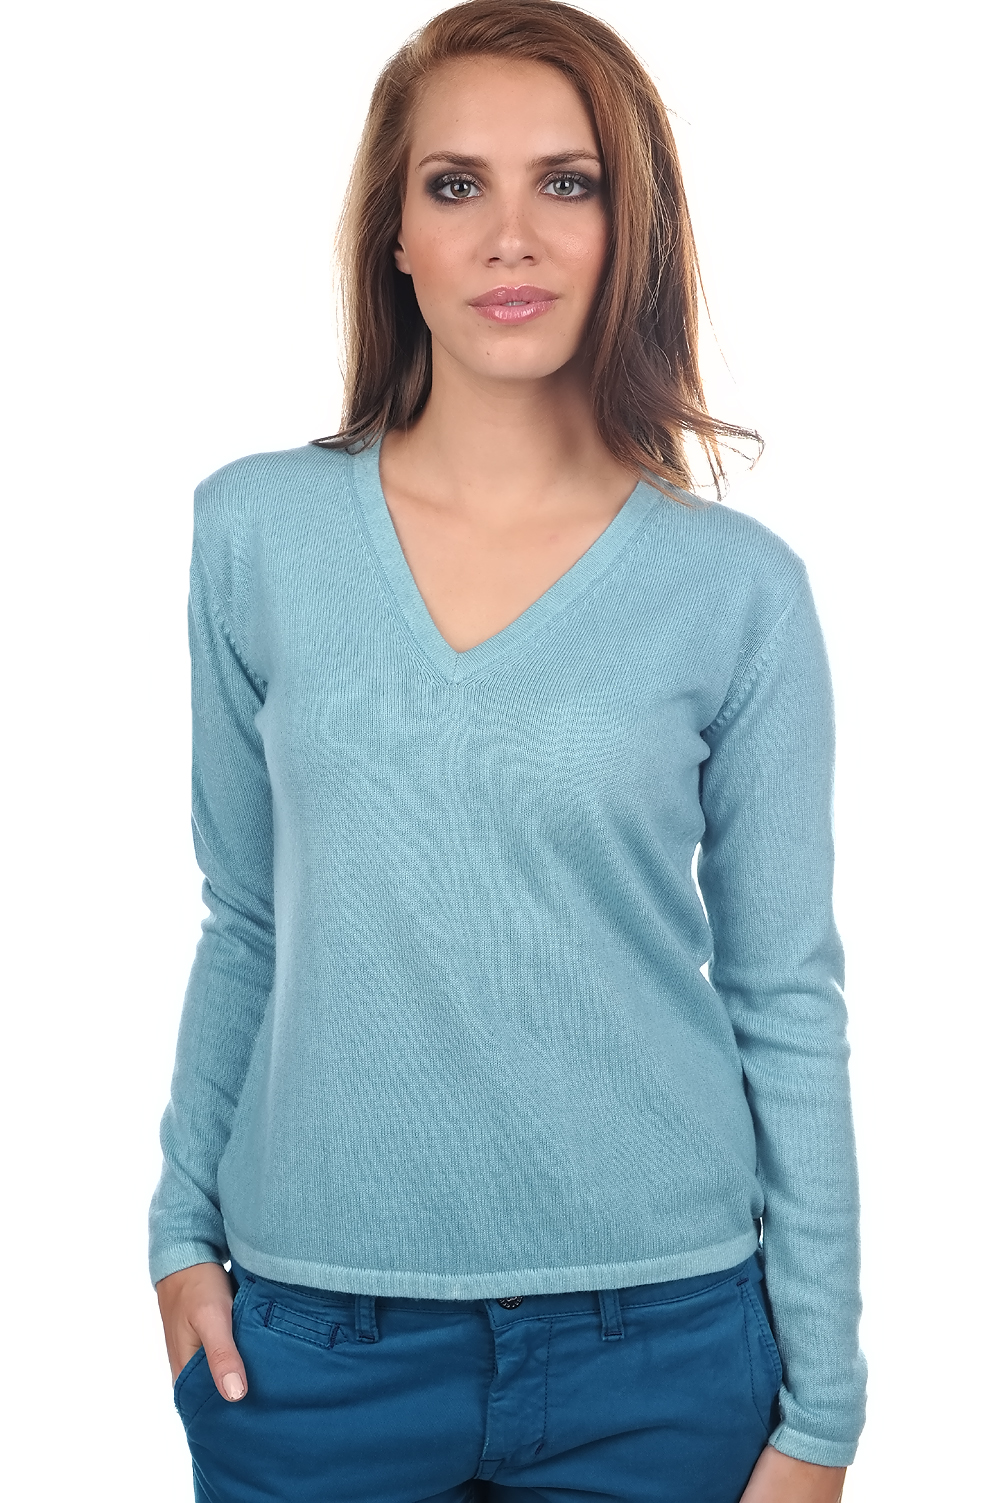 Cashmere ladies spring summer collection emma teal blue 4xl